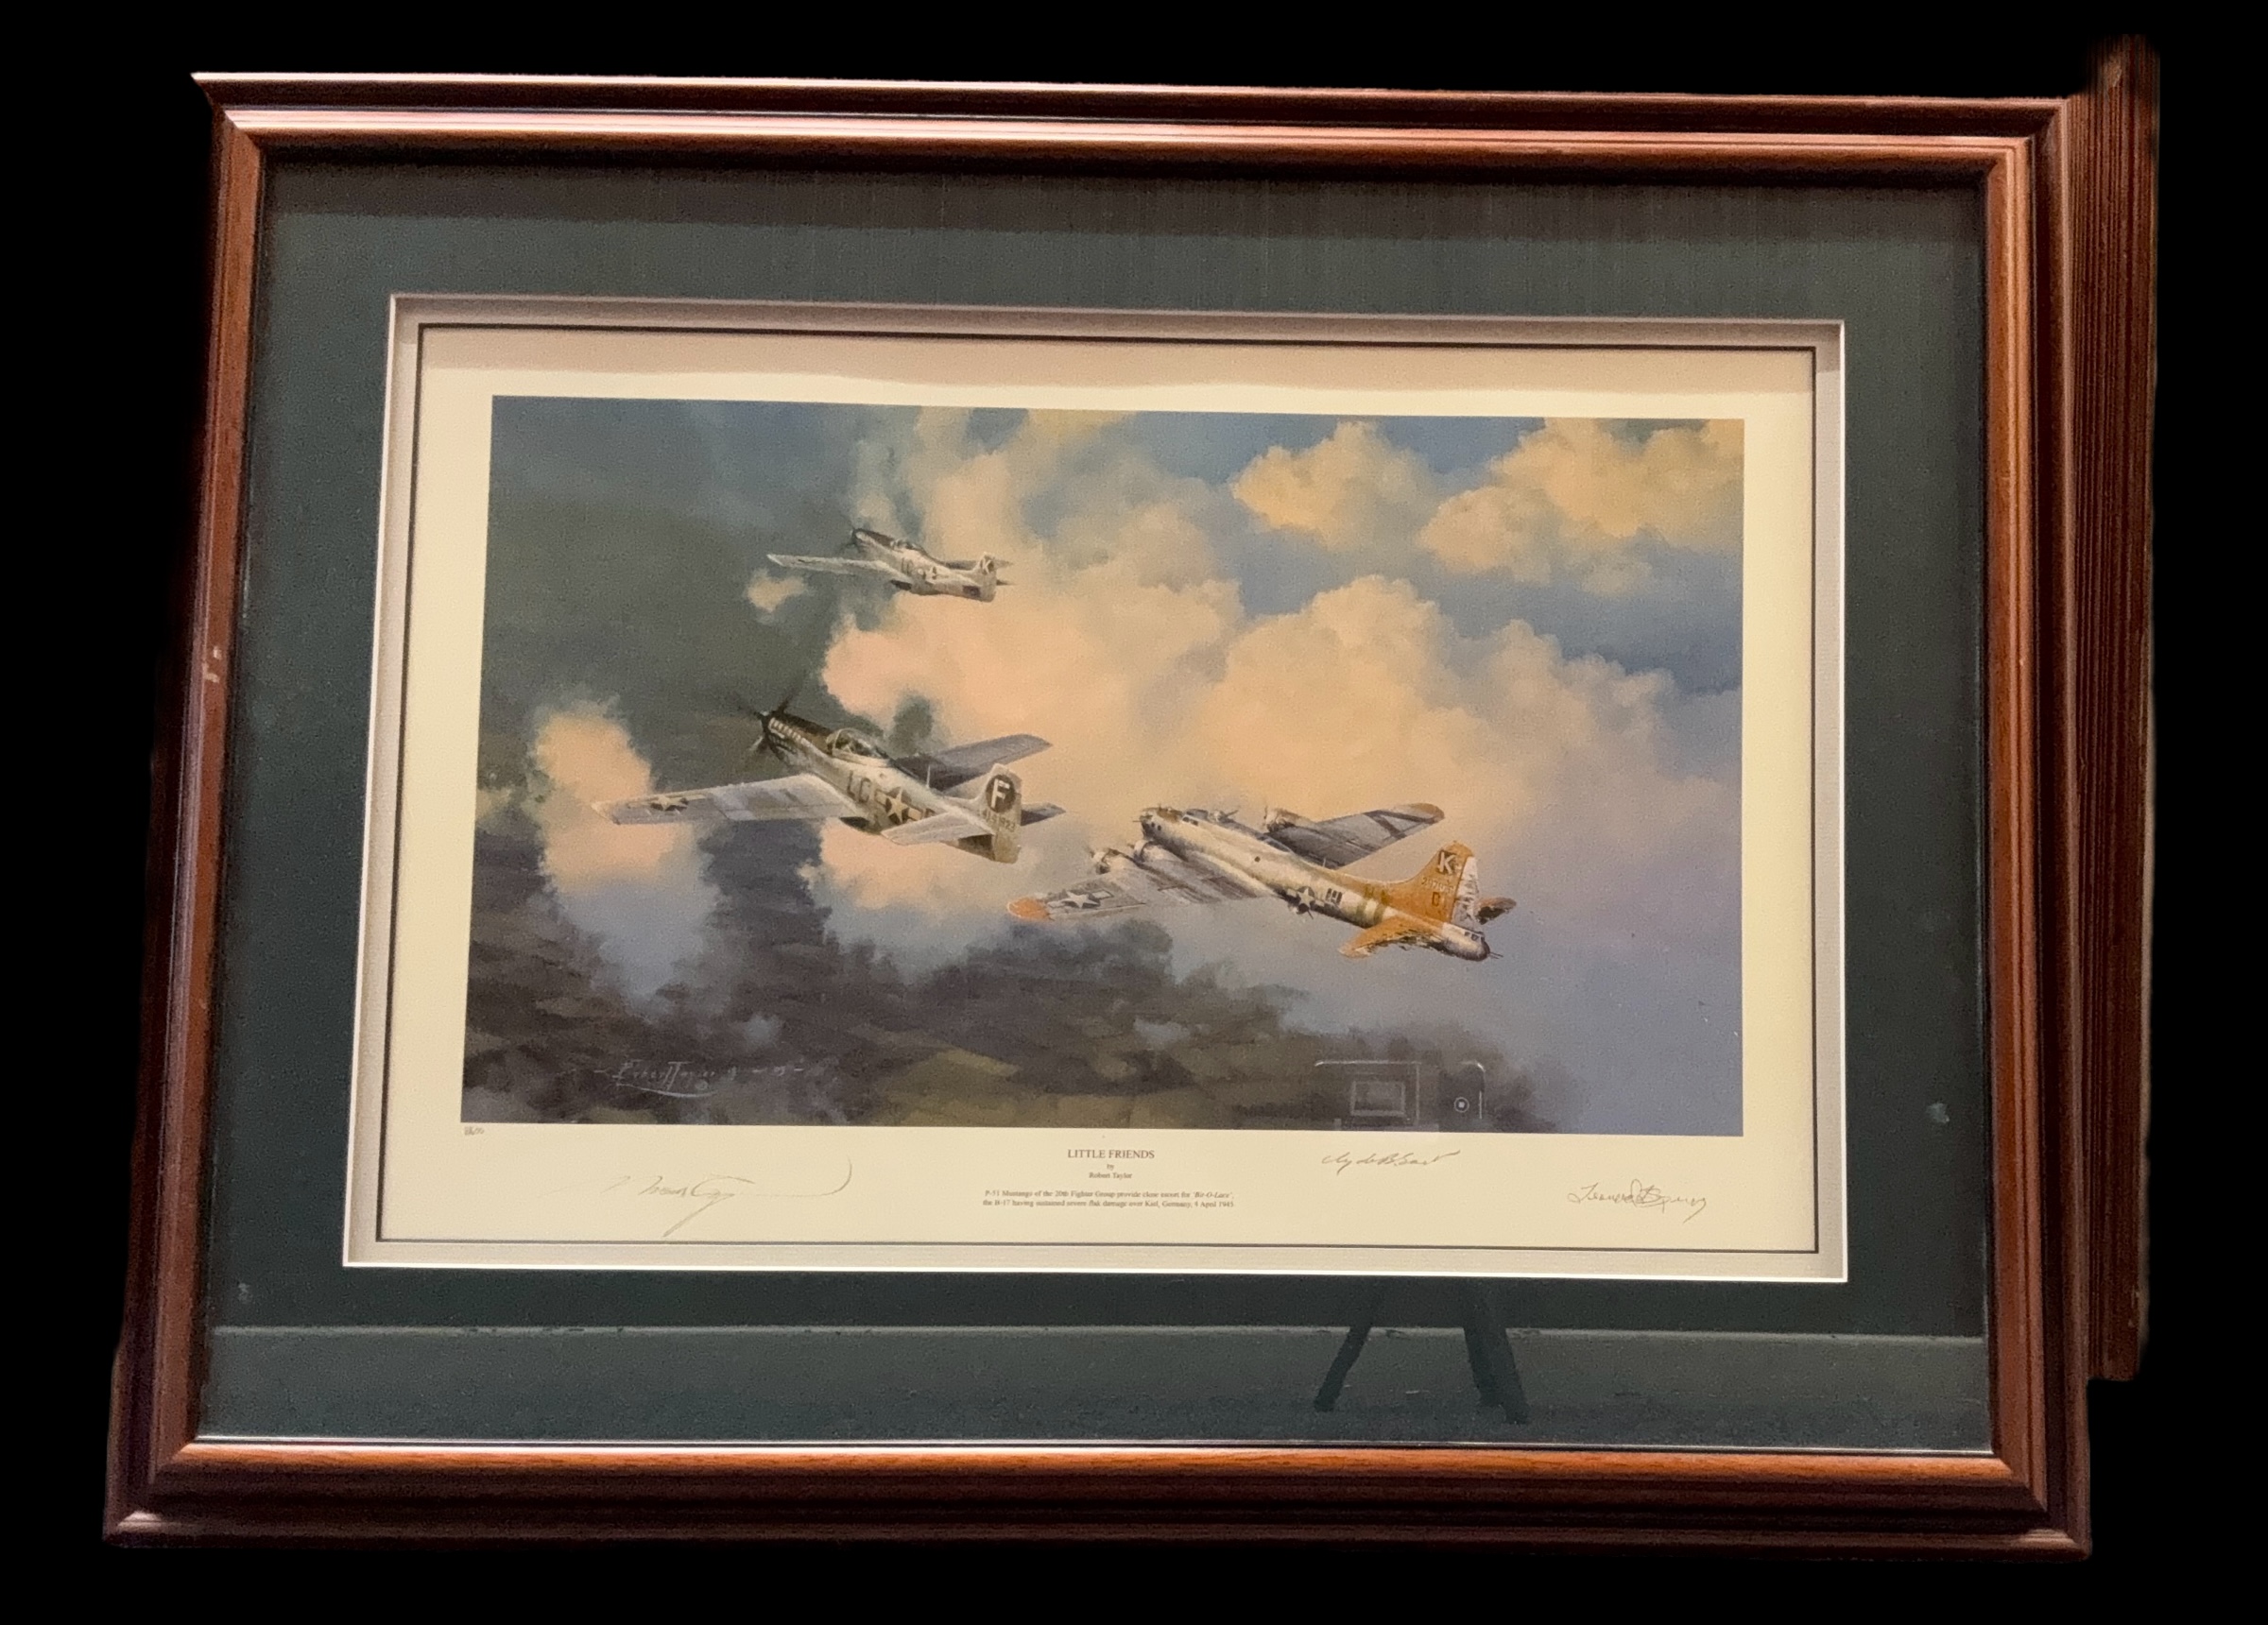 Little Friends WWII print 32x24 inch framed and mounted signed in pencil by the artist Robert